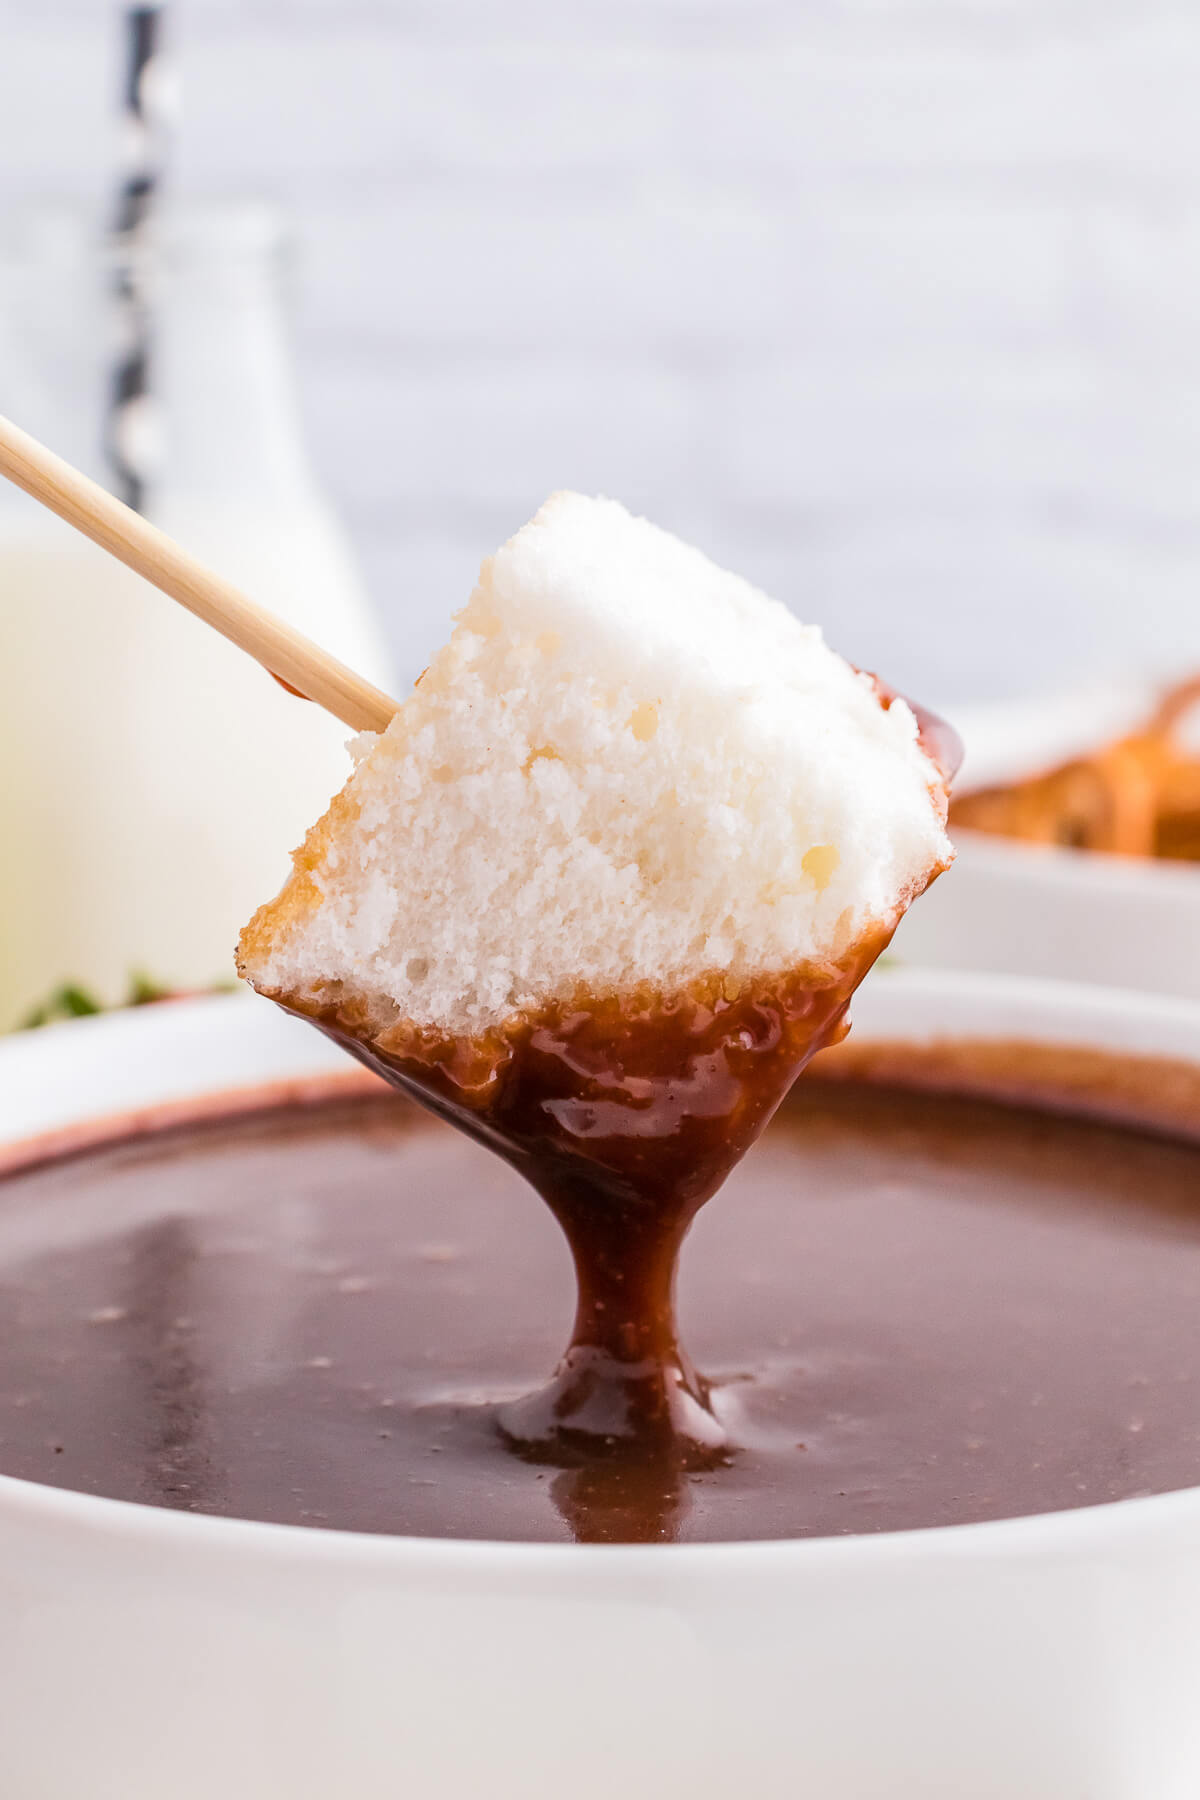 A cube of angel food cake dripping over a chocolate fondue.